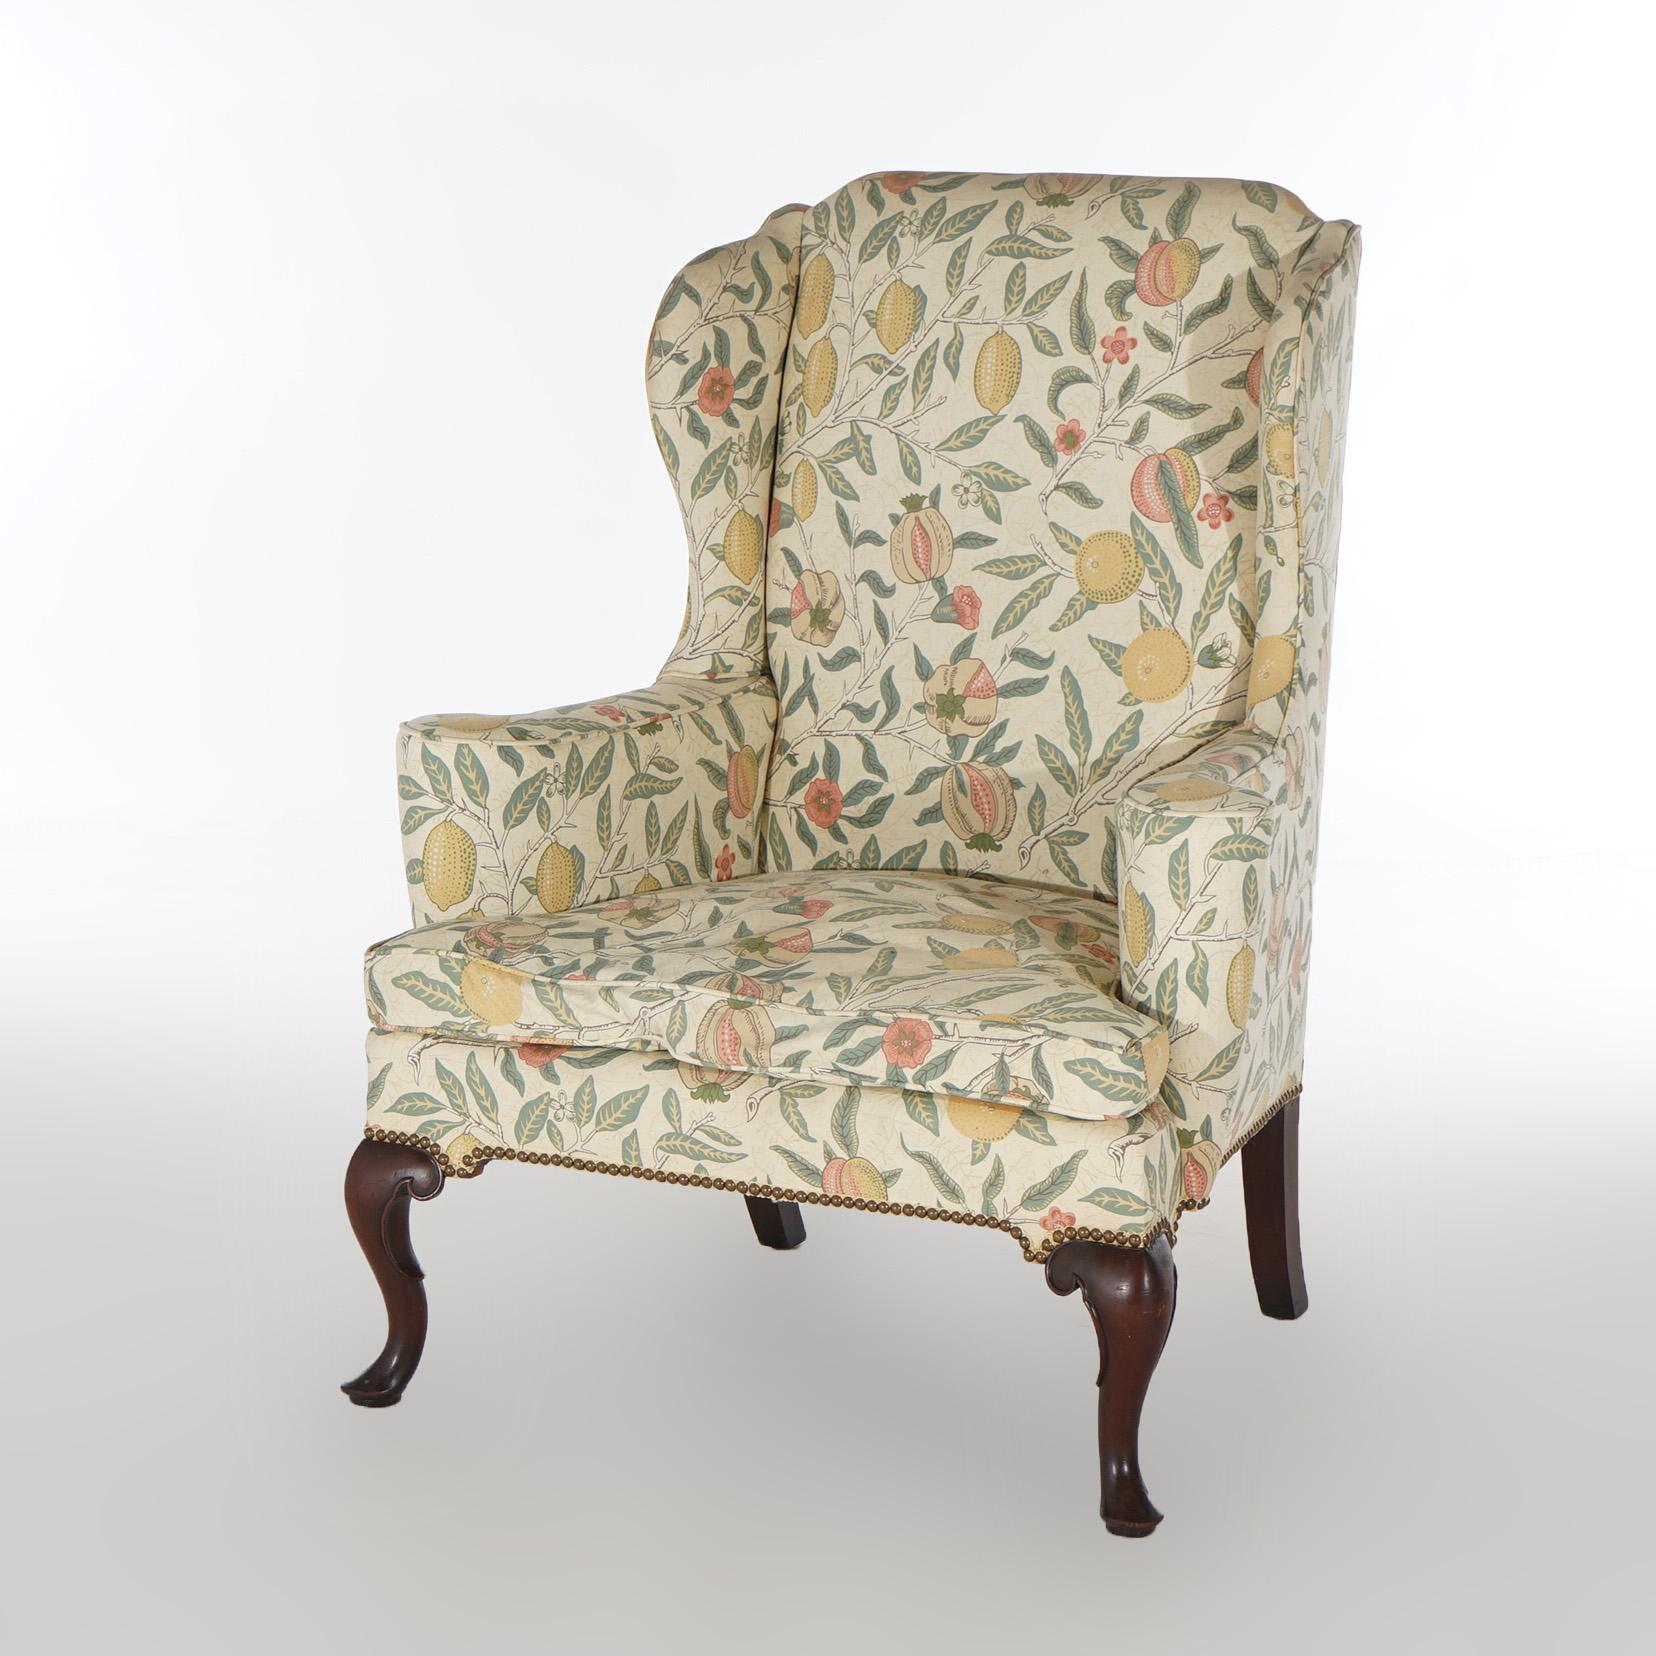 An English Queen Anne style fireside wingback chair offers upholstery with citrus and leaf design, raised on mahogany legs, 20th century

Measures - 44